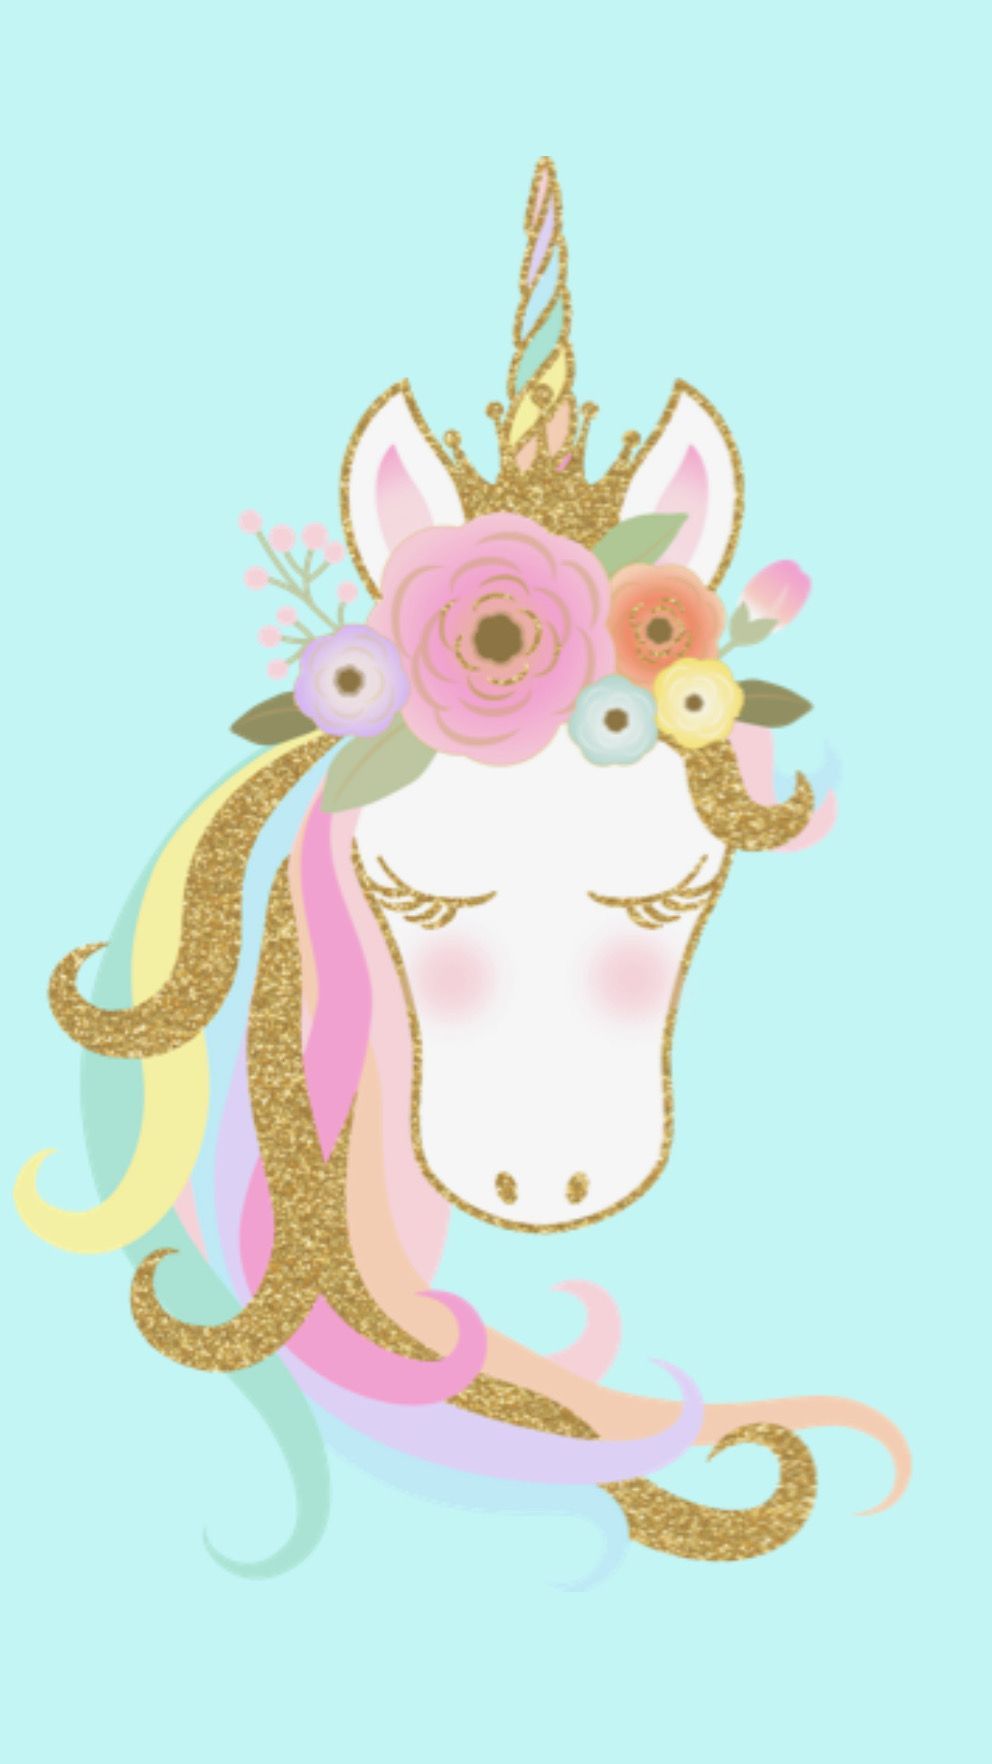 Wallpaper iPhone. Unicorn picture, Unicorn wallpaper, Summer crafts for kids